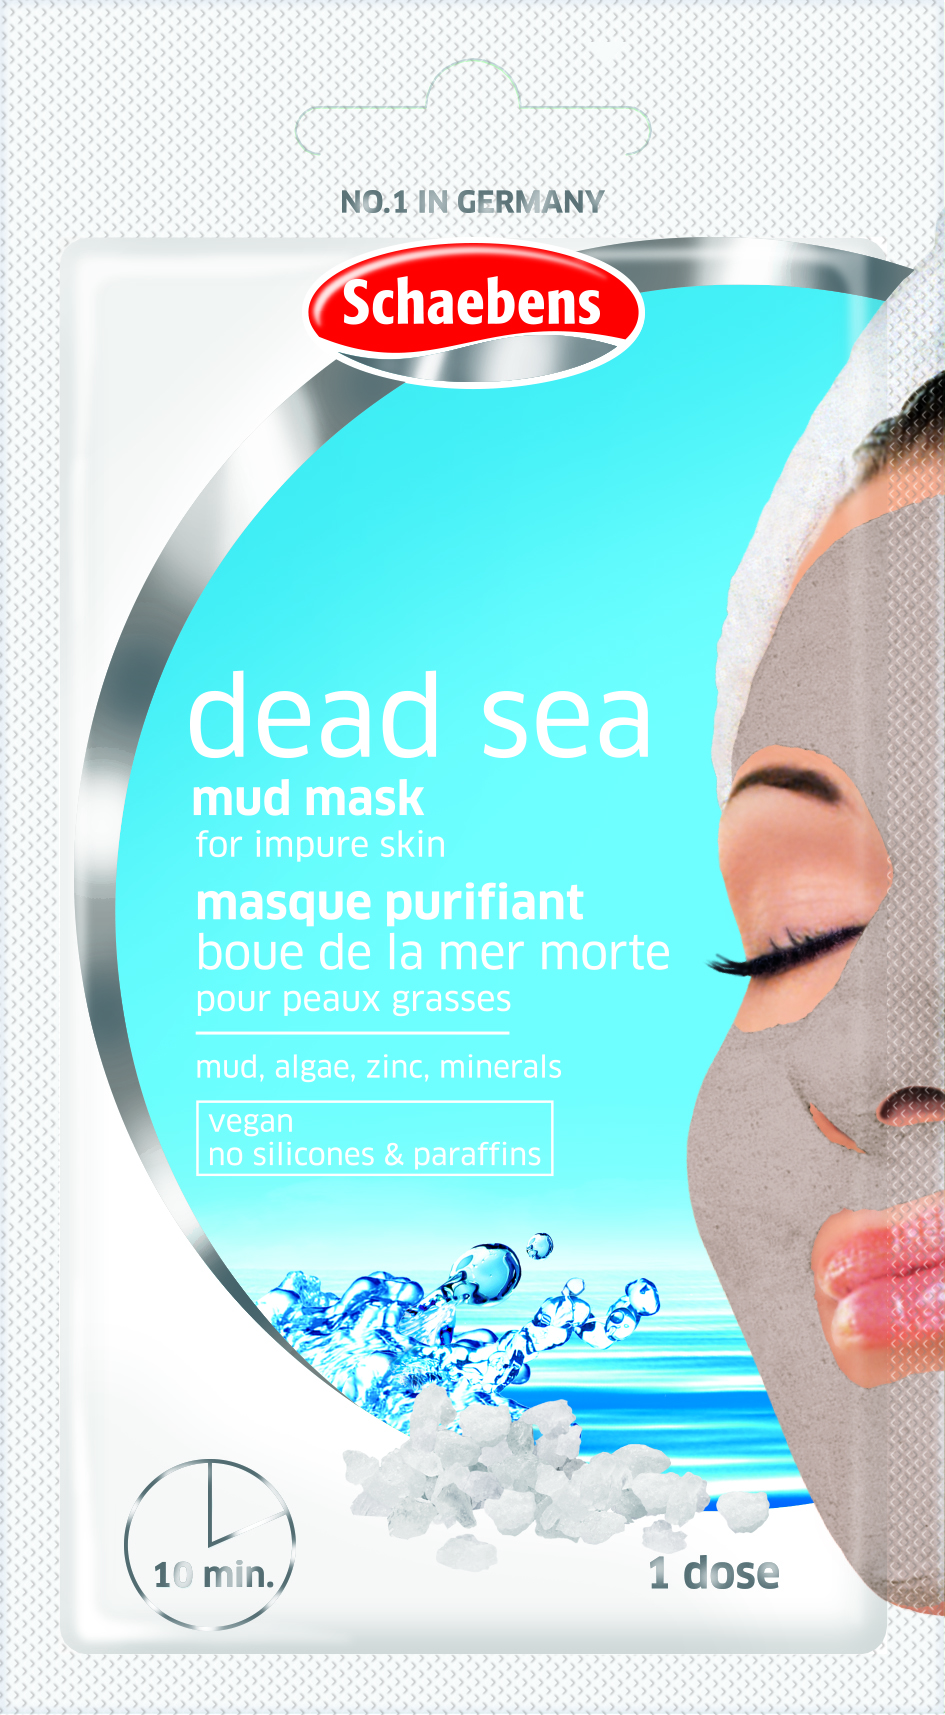 Schaebens Dead sea Mask - Pack of 5 (5 x 15ml for 5 Applications)-Vegan  (German Product)